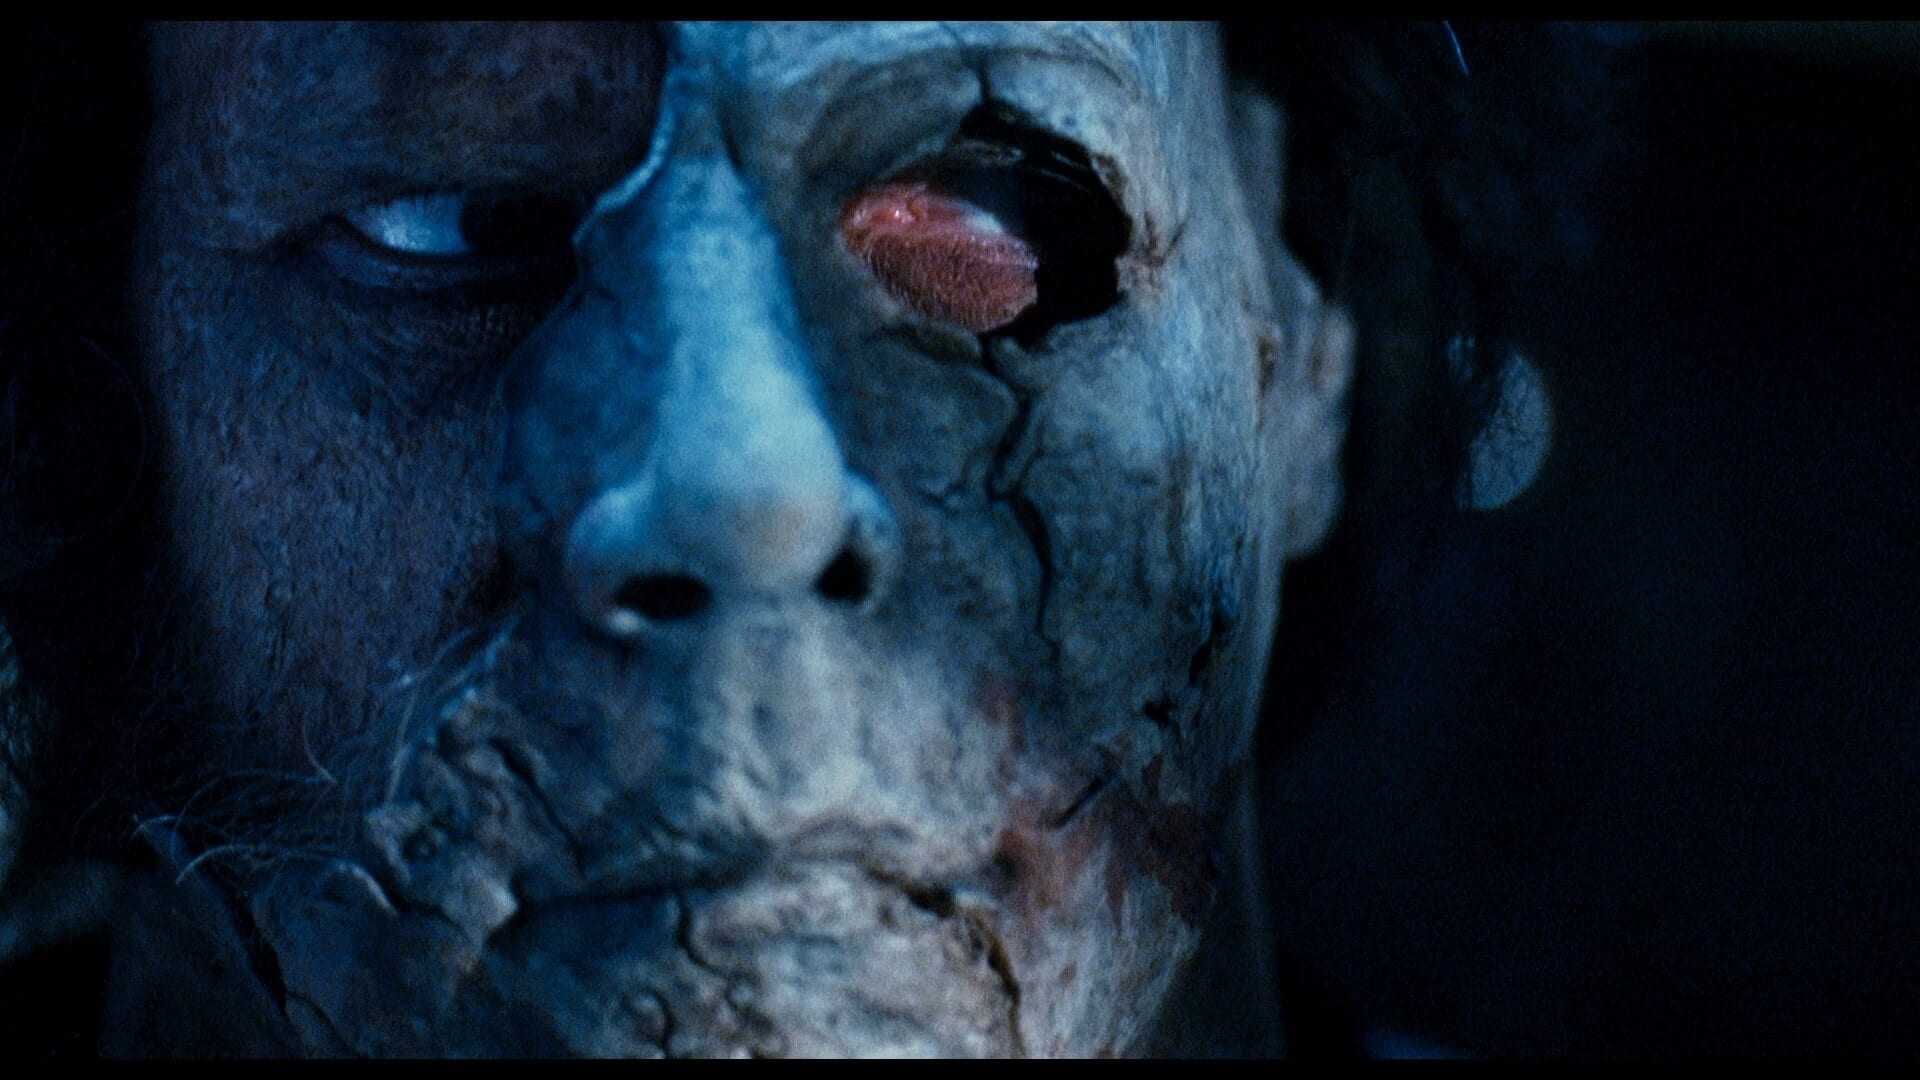 Rob Zombie's Halloween II: Aftermath. Now available! The